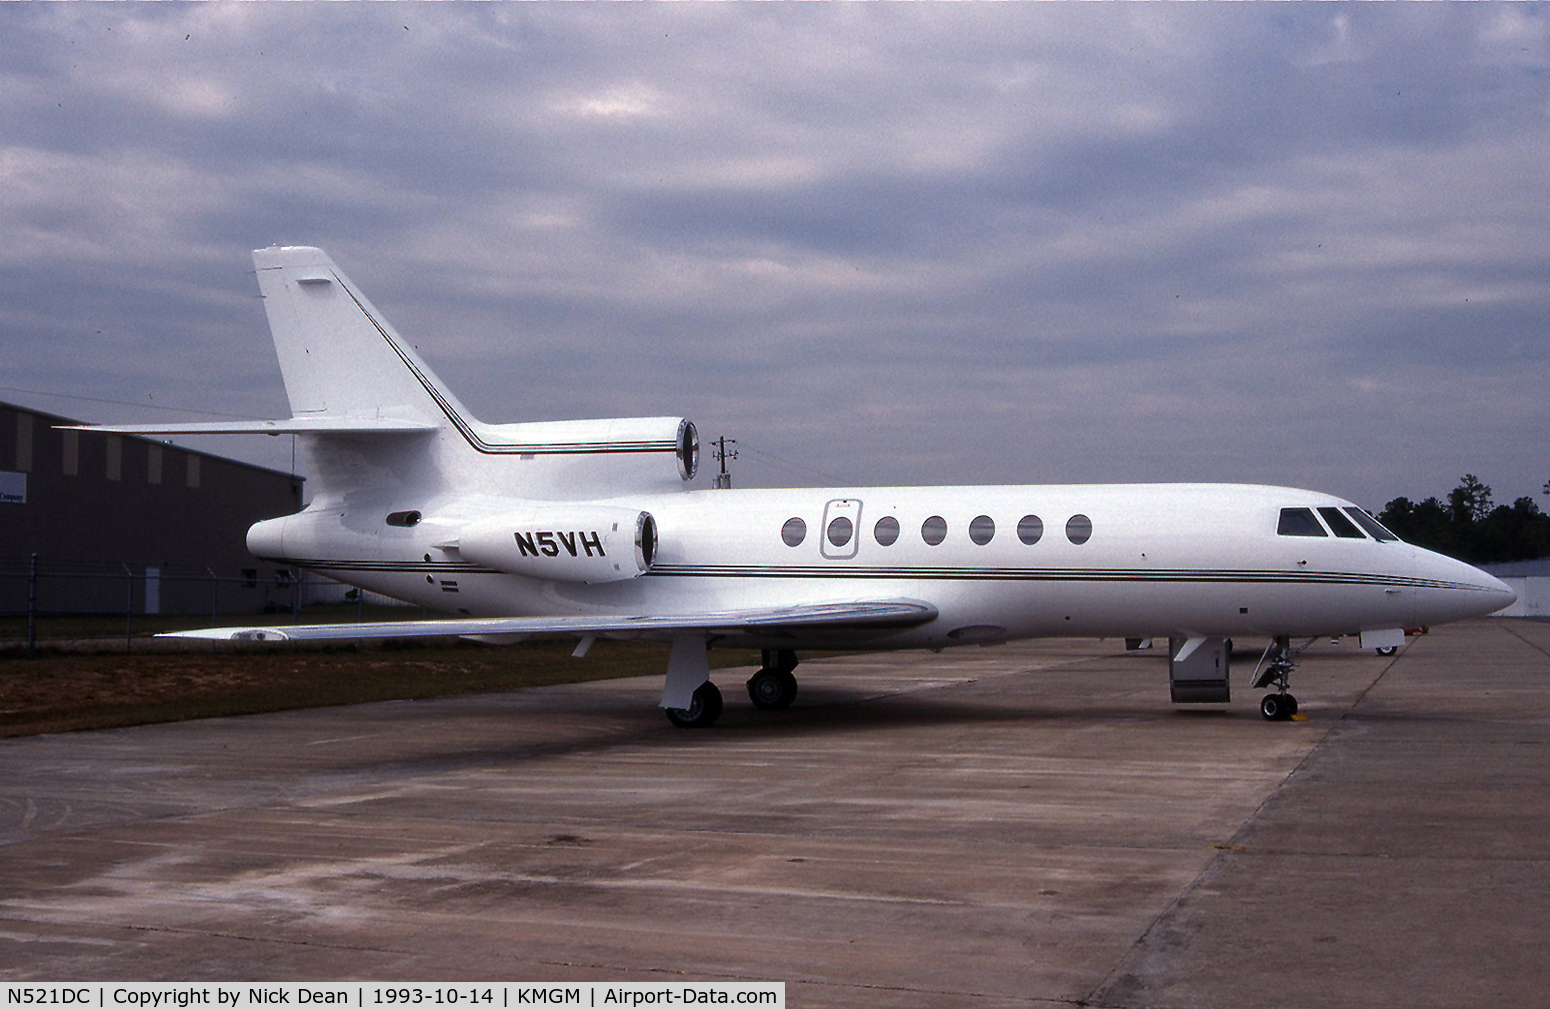 N521DC, 1986 Dassault-Breguet Falcon 50 C/N 163, Seen here as N5VF this airframe is currently registered N521DC as posted